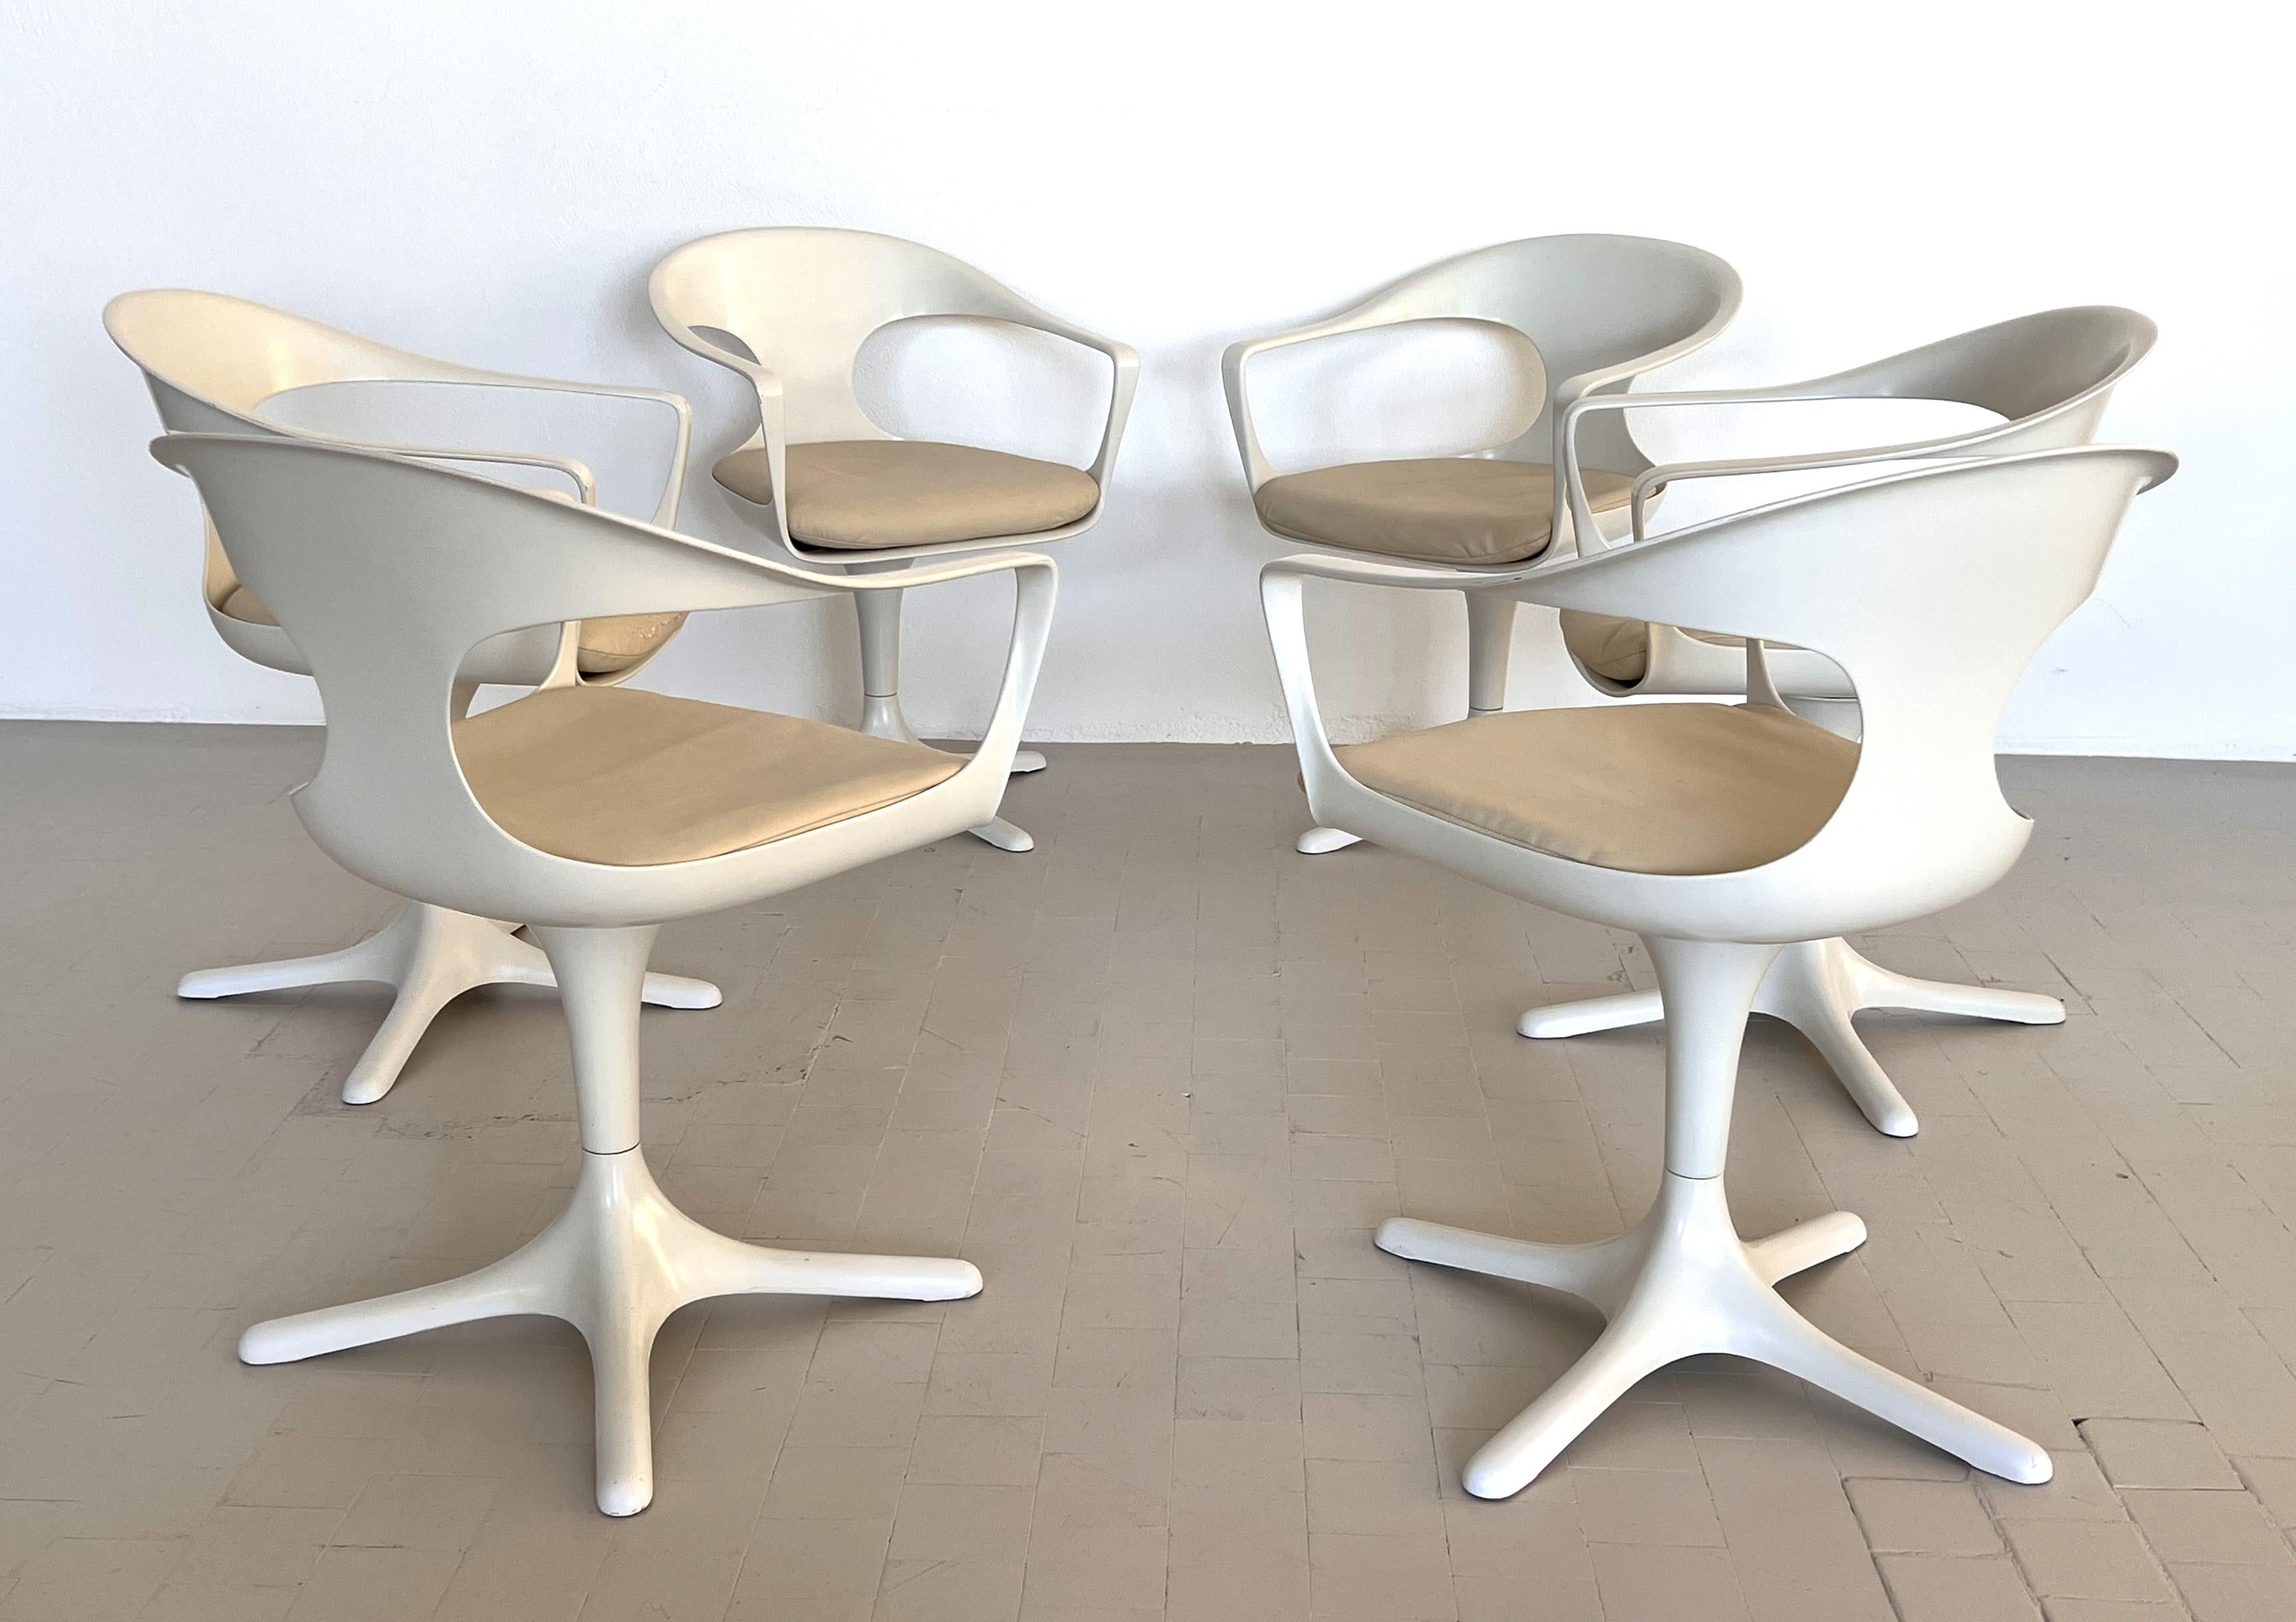 Resin Space Age Swivel Dining Room Chairs by Konrad Schäfer, Set of 6, 1960s For Sale